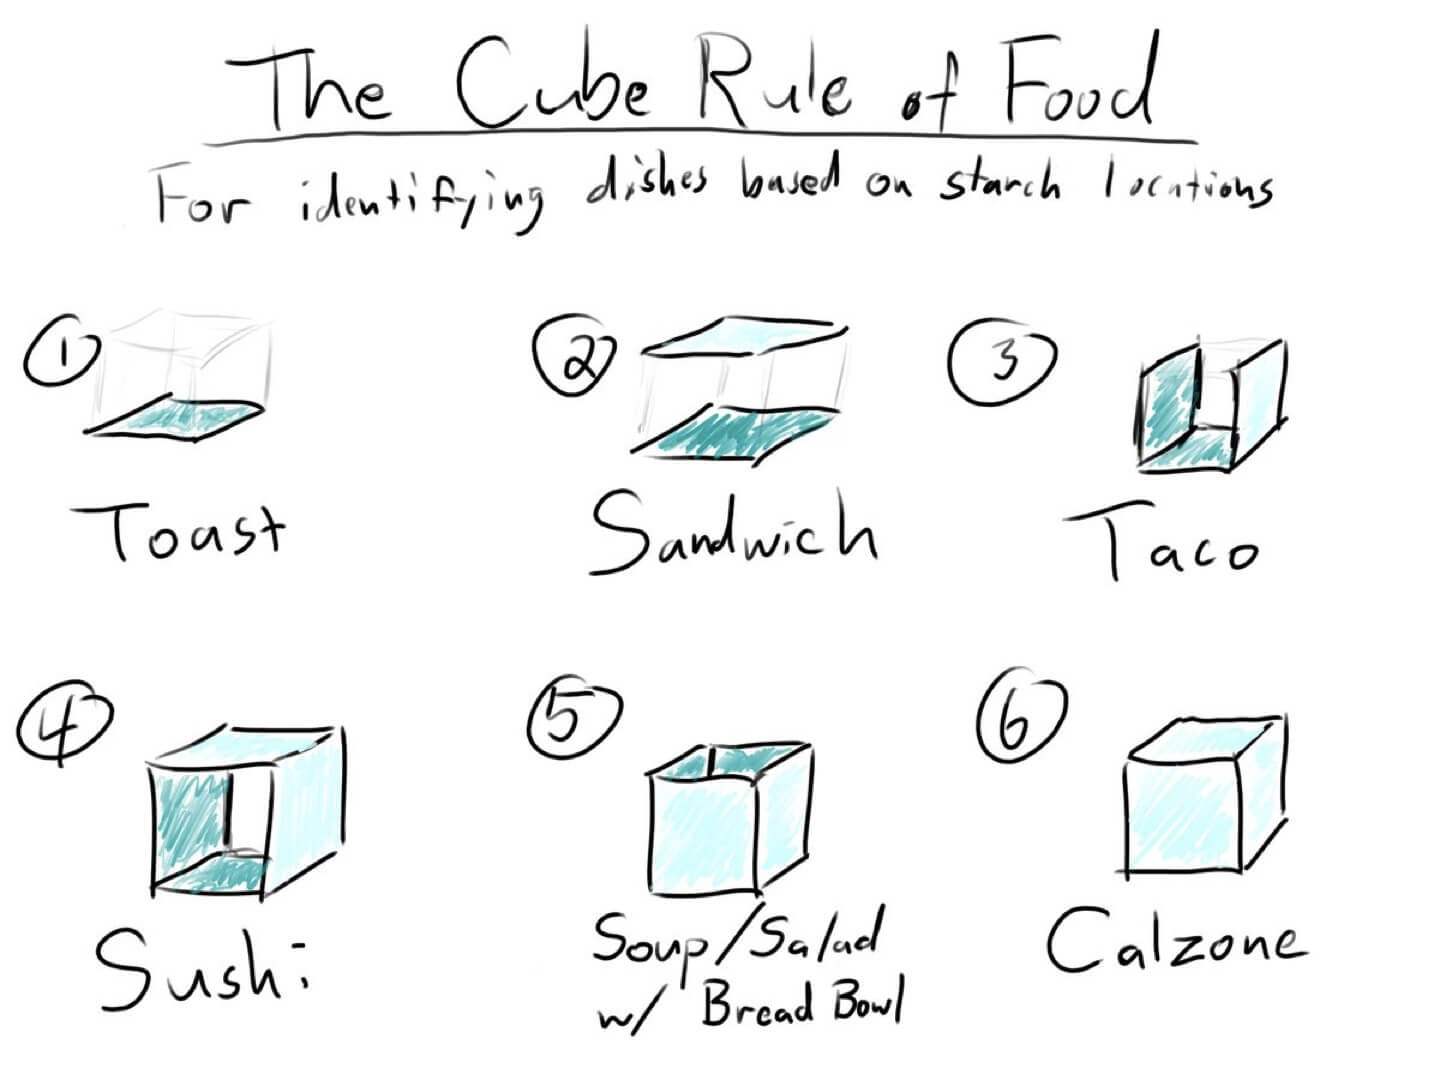 The Cube Rule of Food for identifying dishes based on starch locations